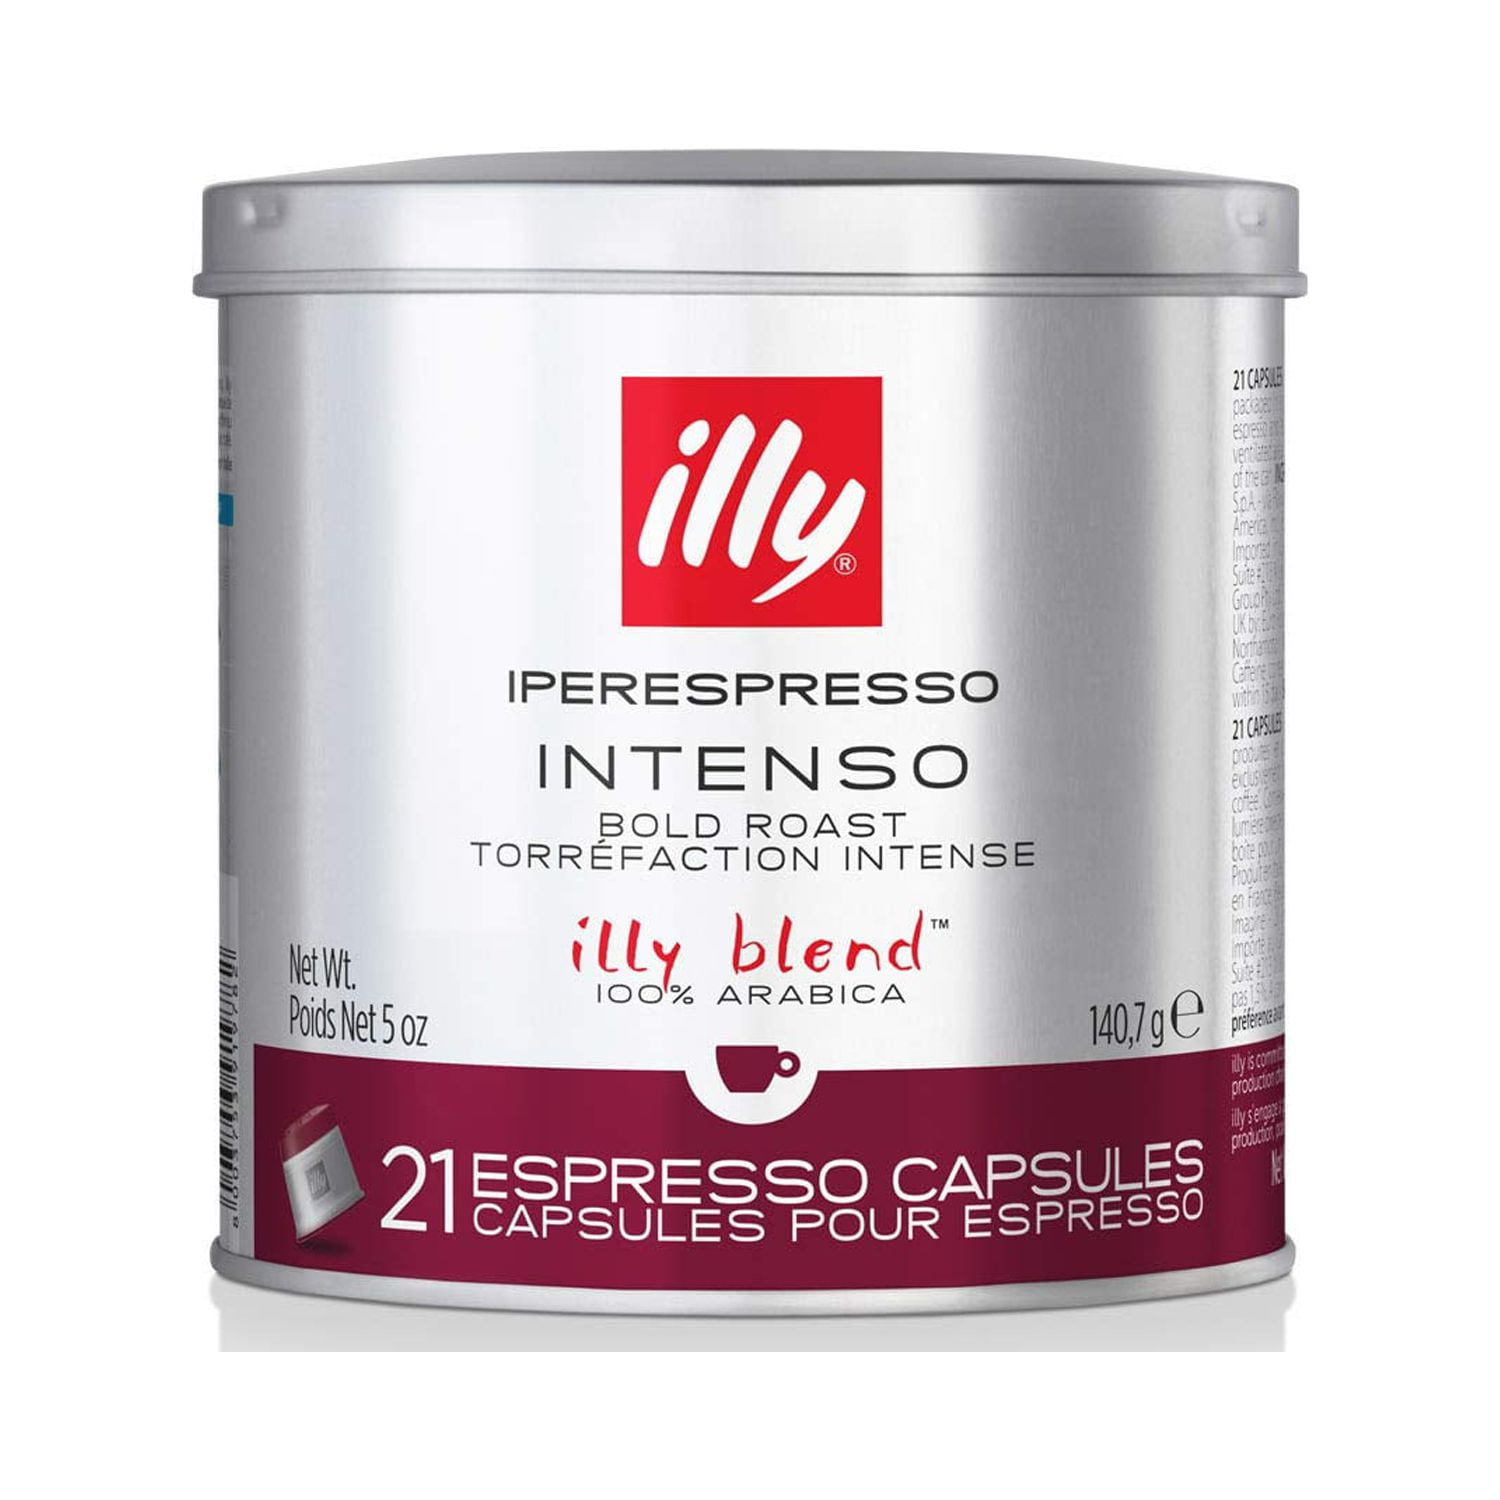 illy Coffee, Intenso iperEspresso Capsule, Dark Roast Espresso Pods,  Compatible with illy iperEspresso Machines, (21 ct), 140.7g (packaging may  Vary) 